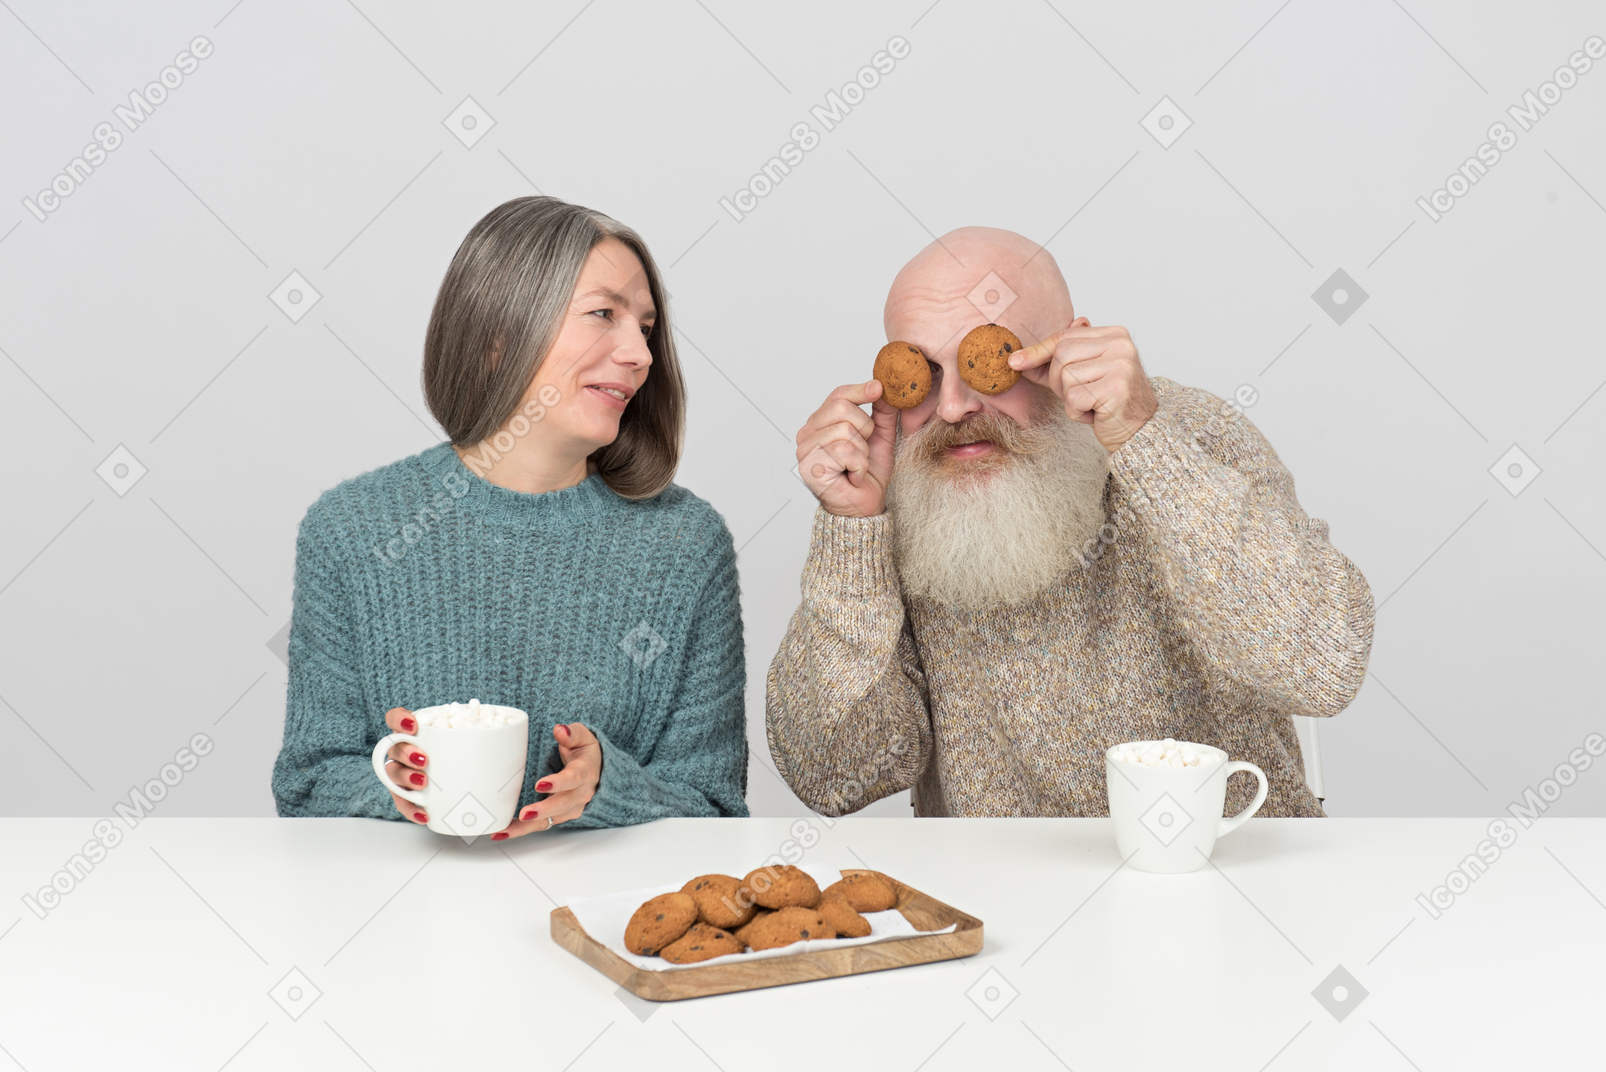 Elder man covering his eyes with cookies sitting next to his wife